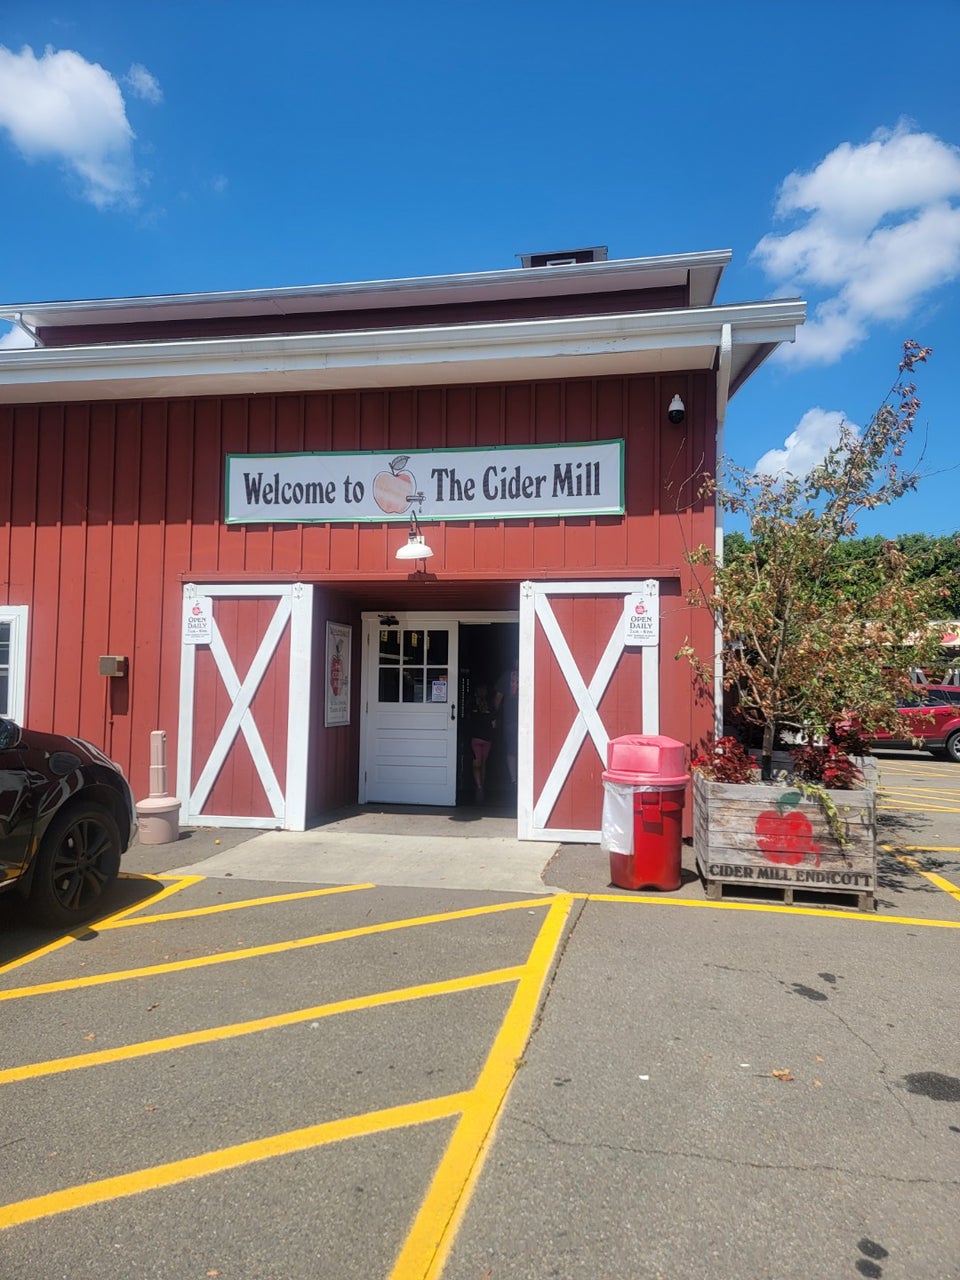 The Cider Mill